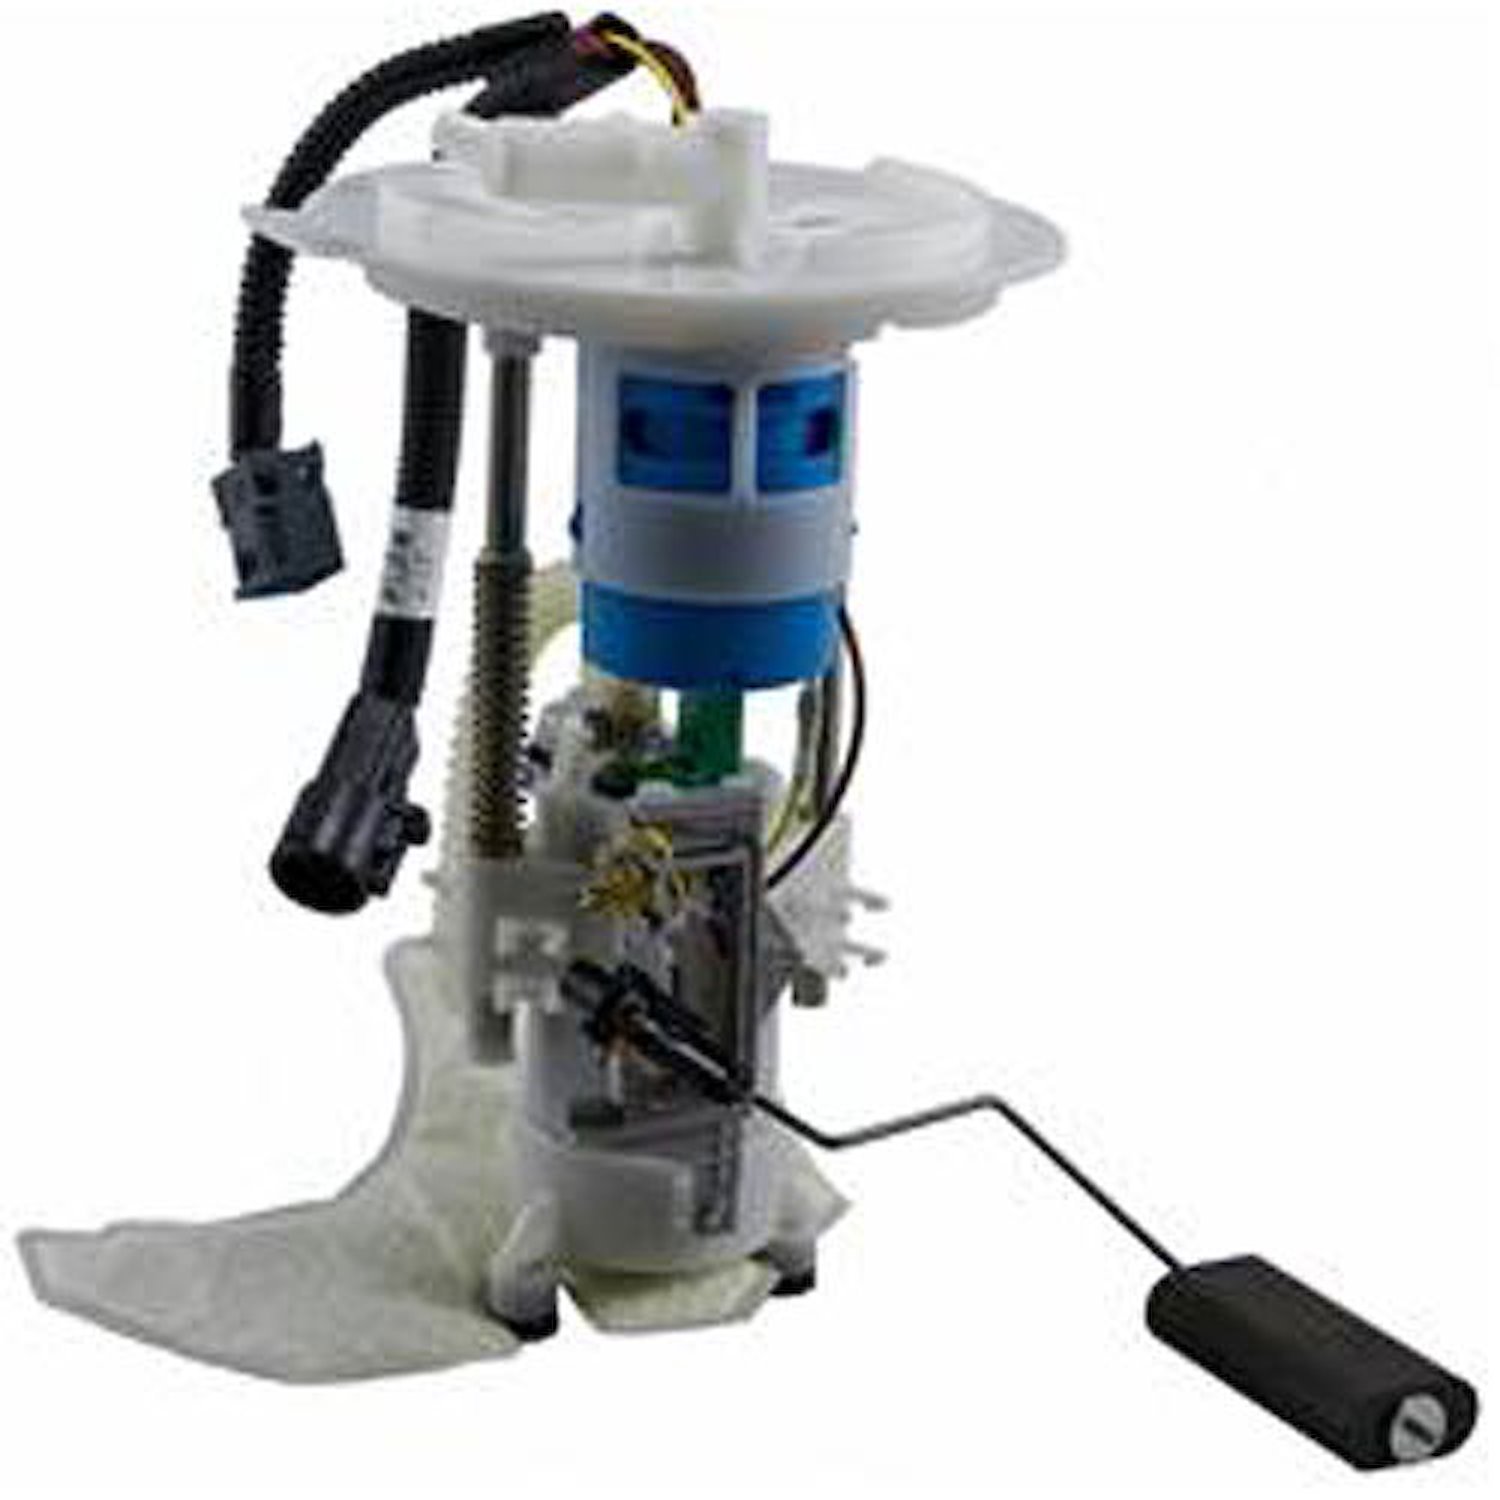 OE Ford Replacement Electric Fuel Pump Module Assembly 2003-05 Ford Explorer 4.6L V8